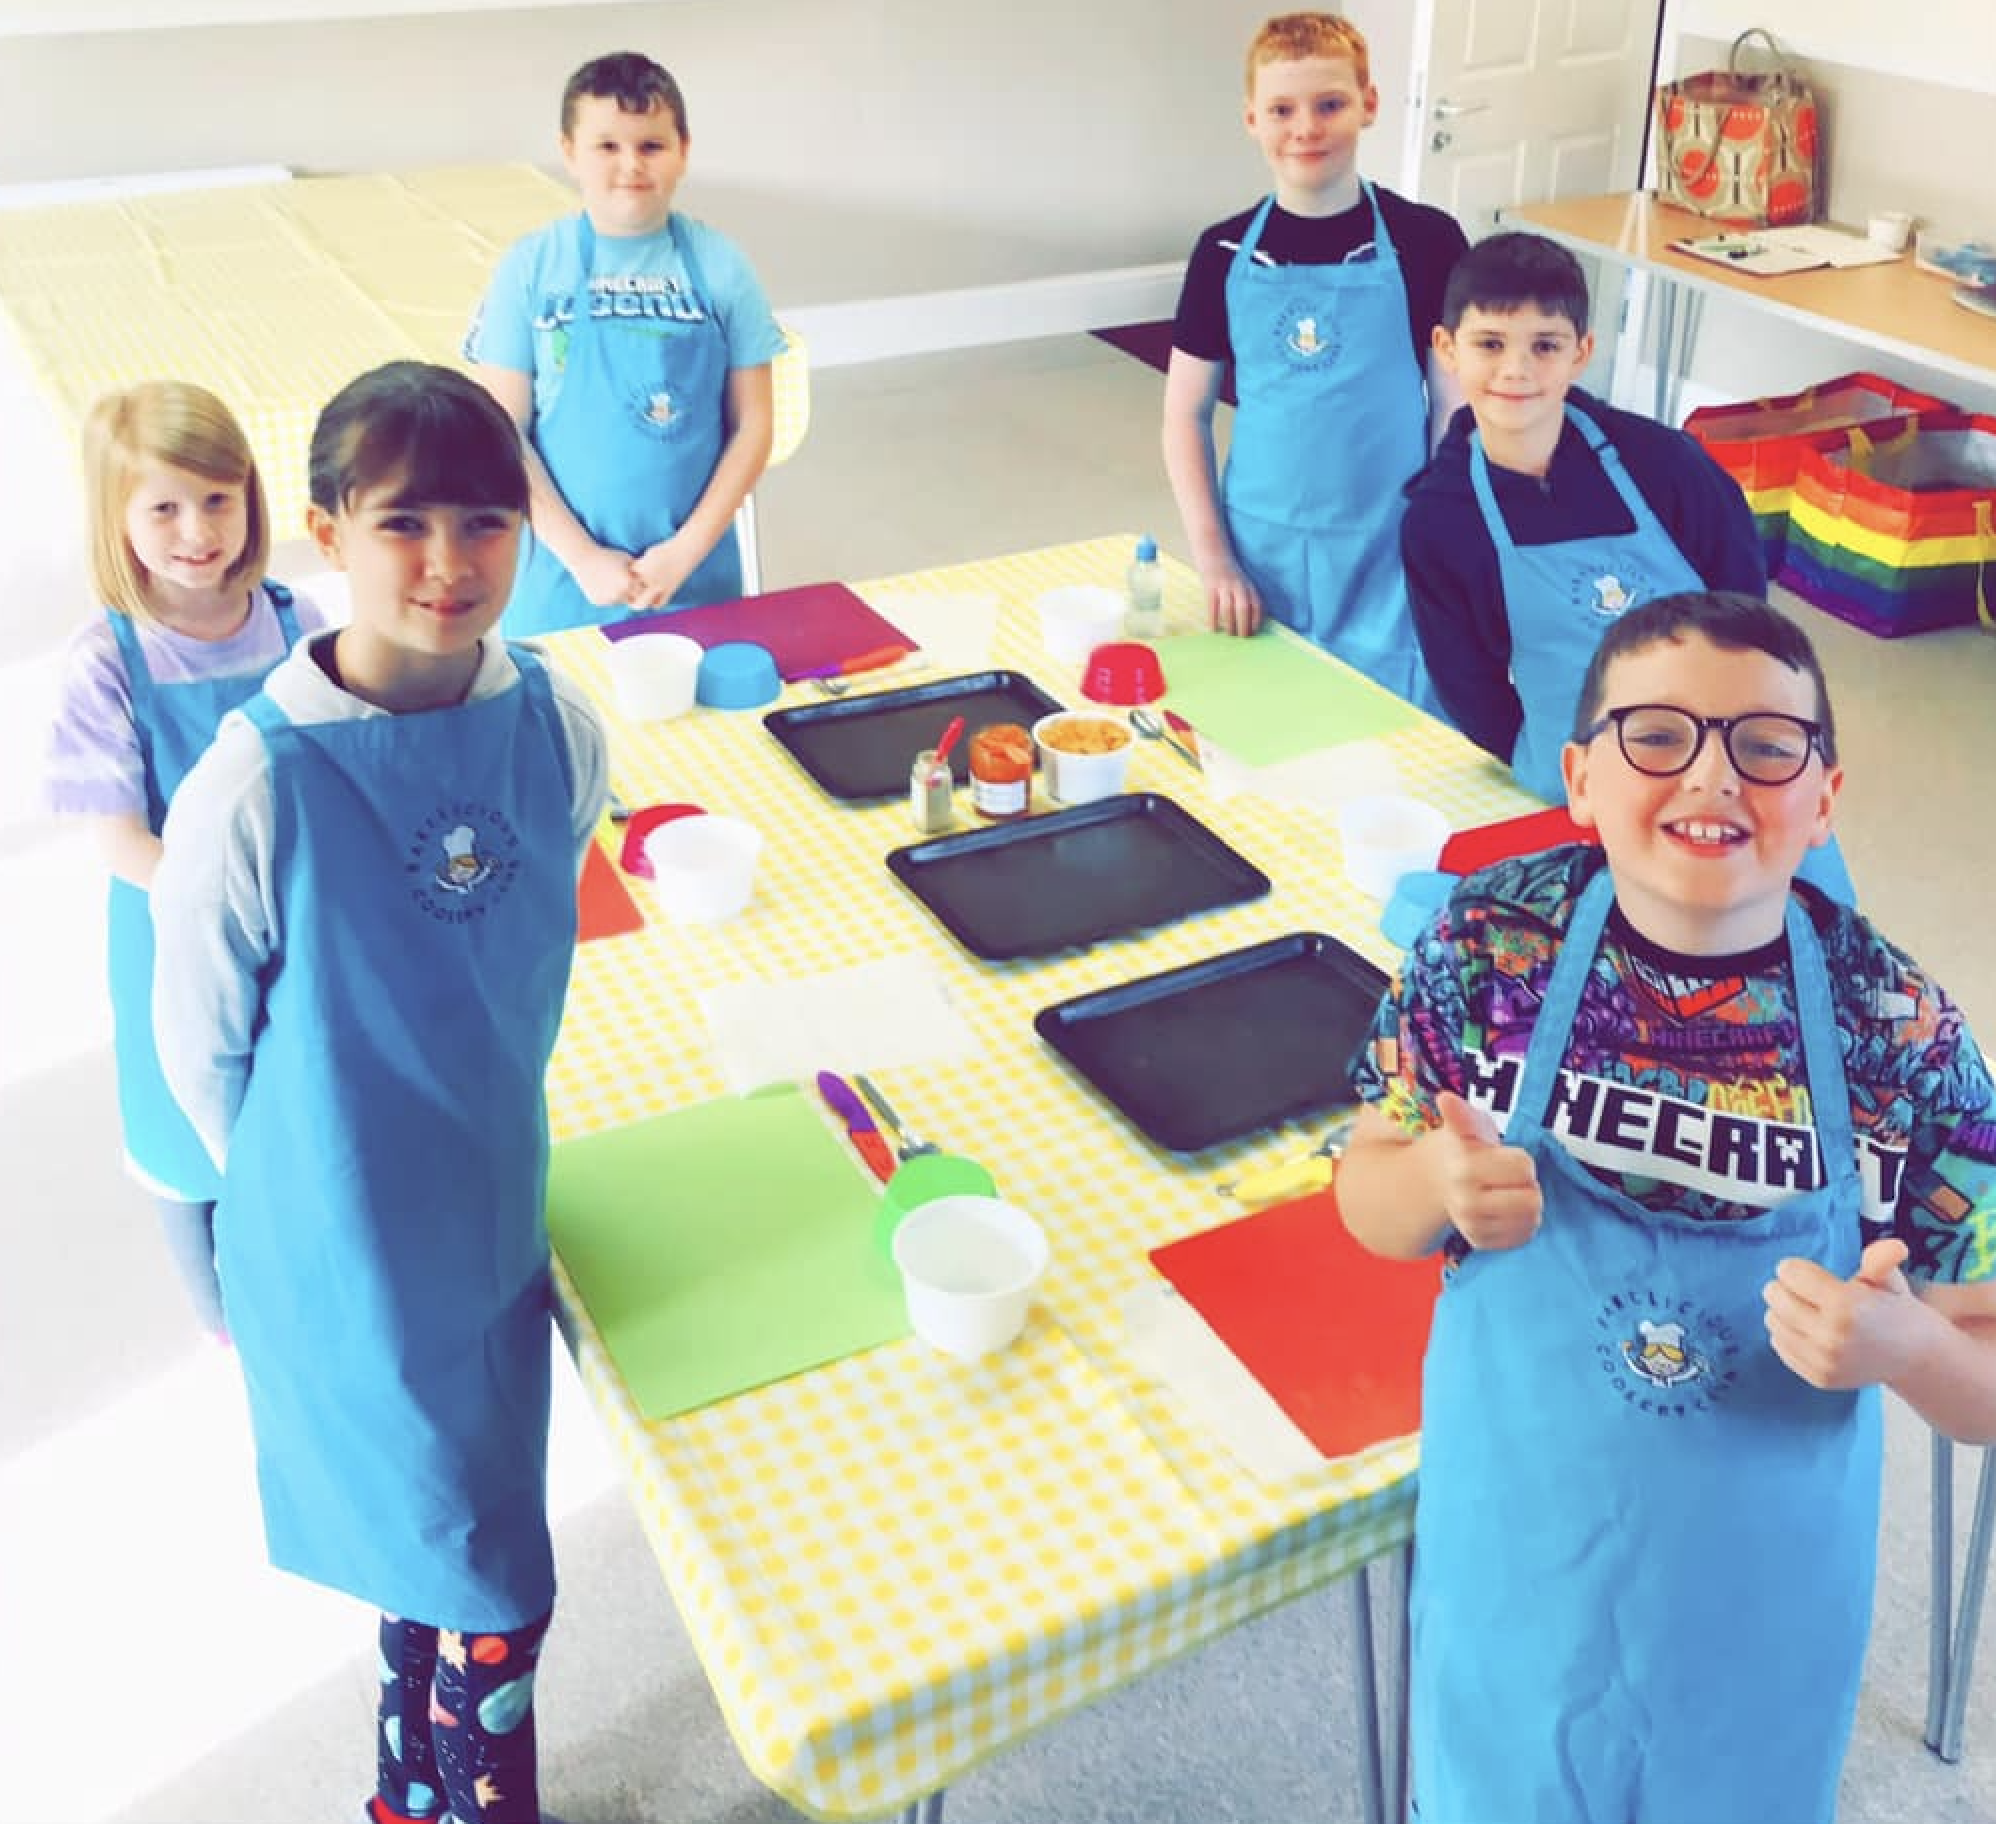 Culinary classes for young budding cheflets